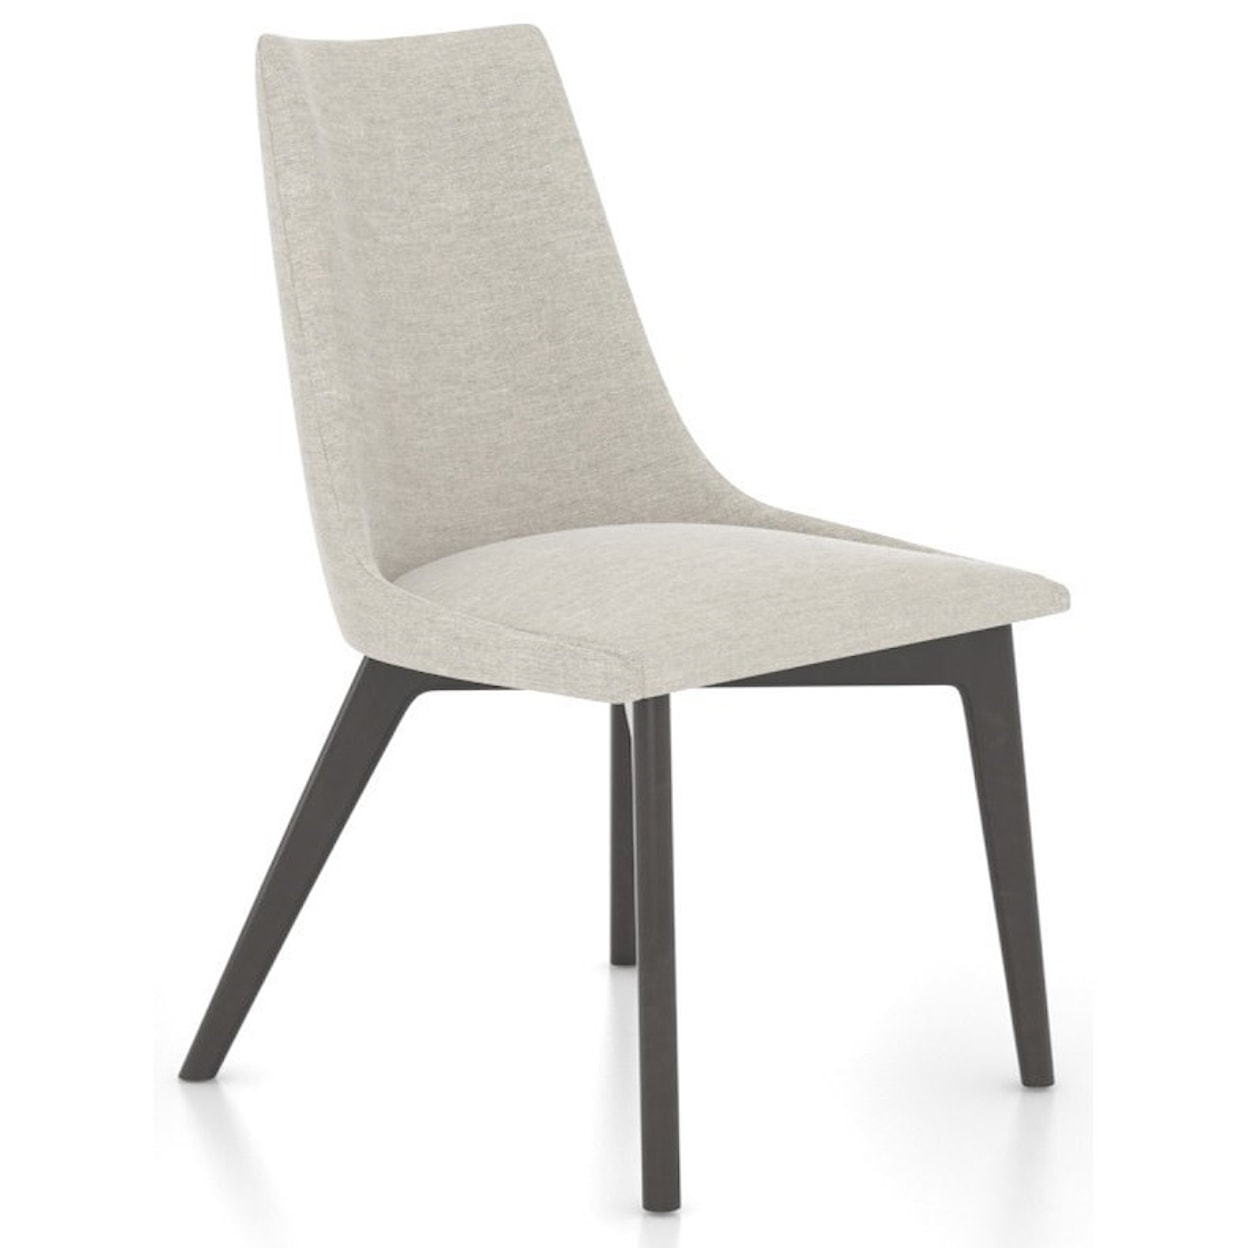 Canadel Downtown Upholstered Dining Side Chair